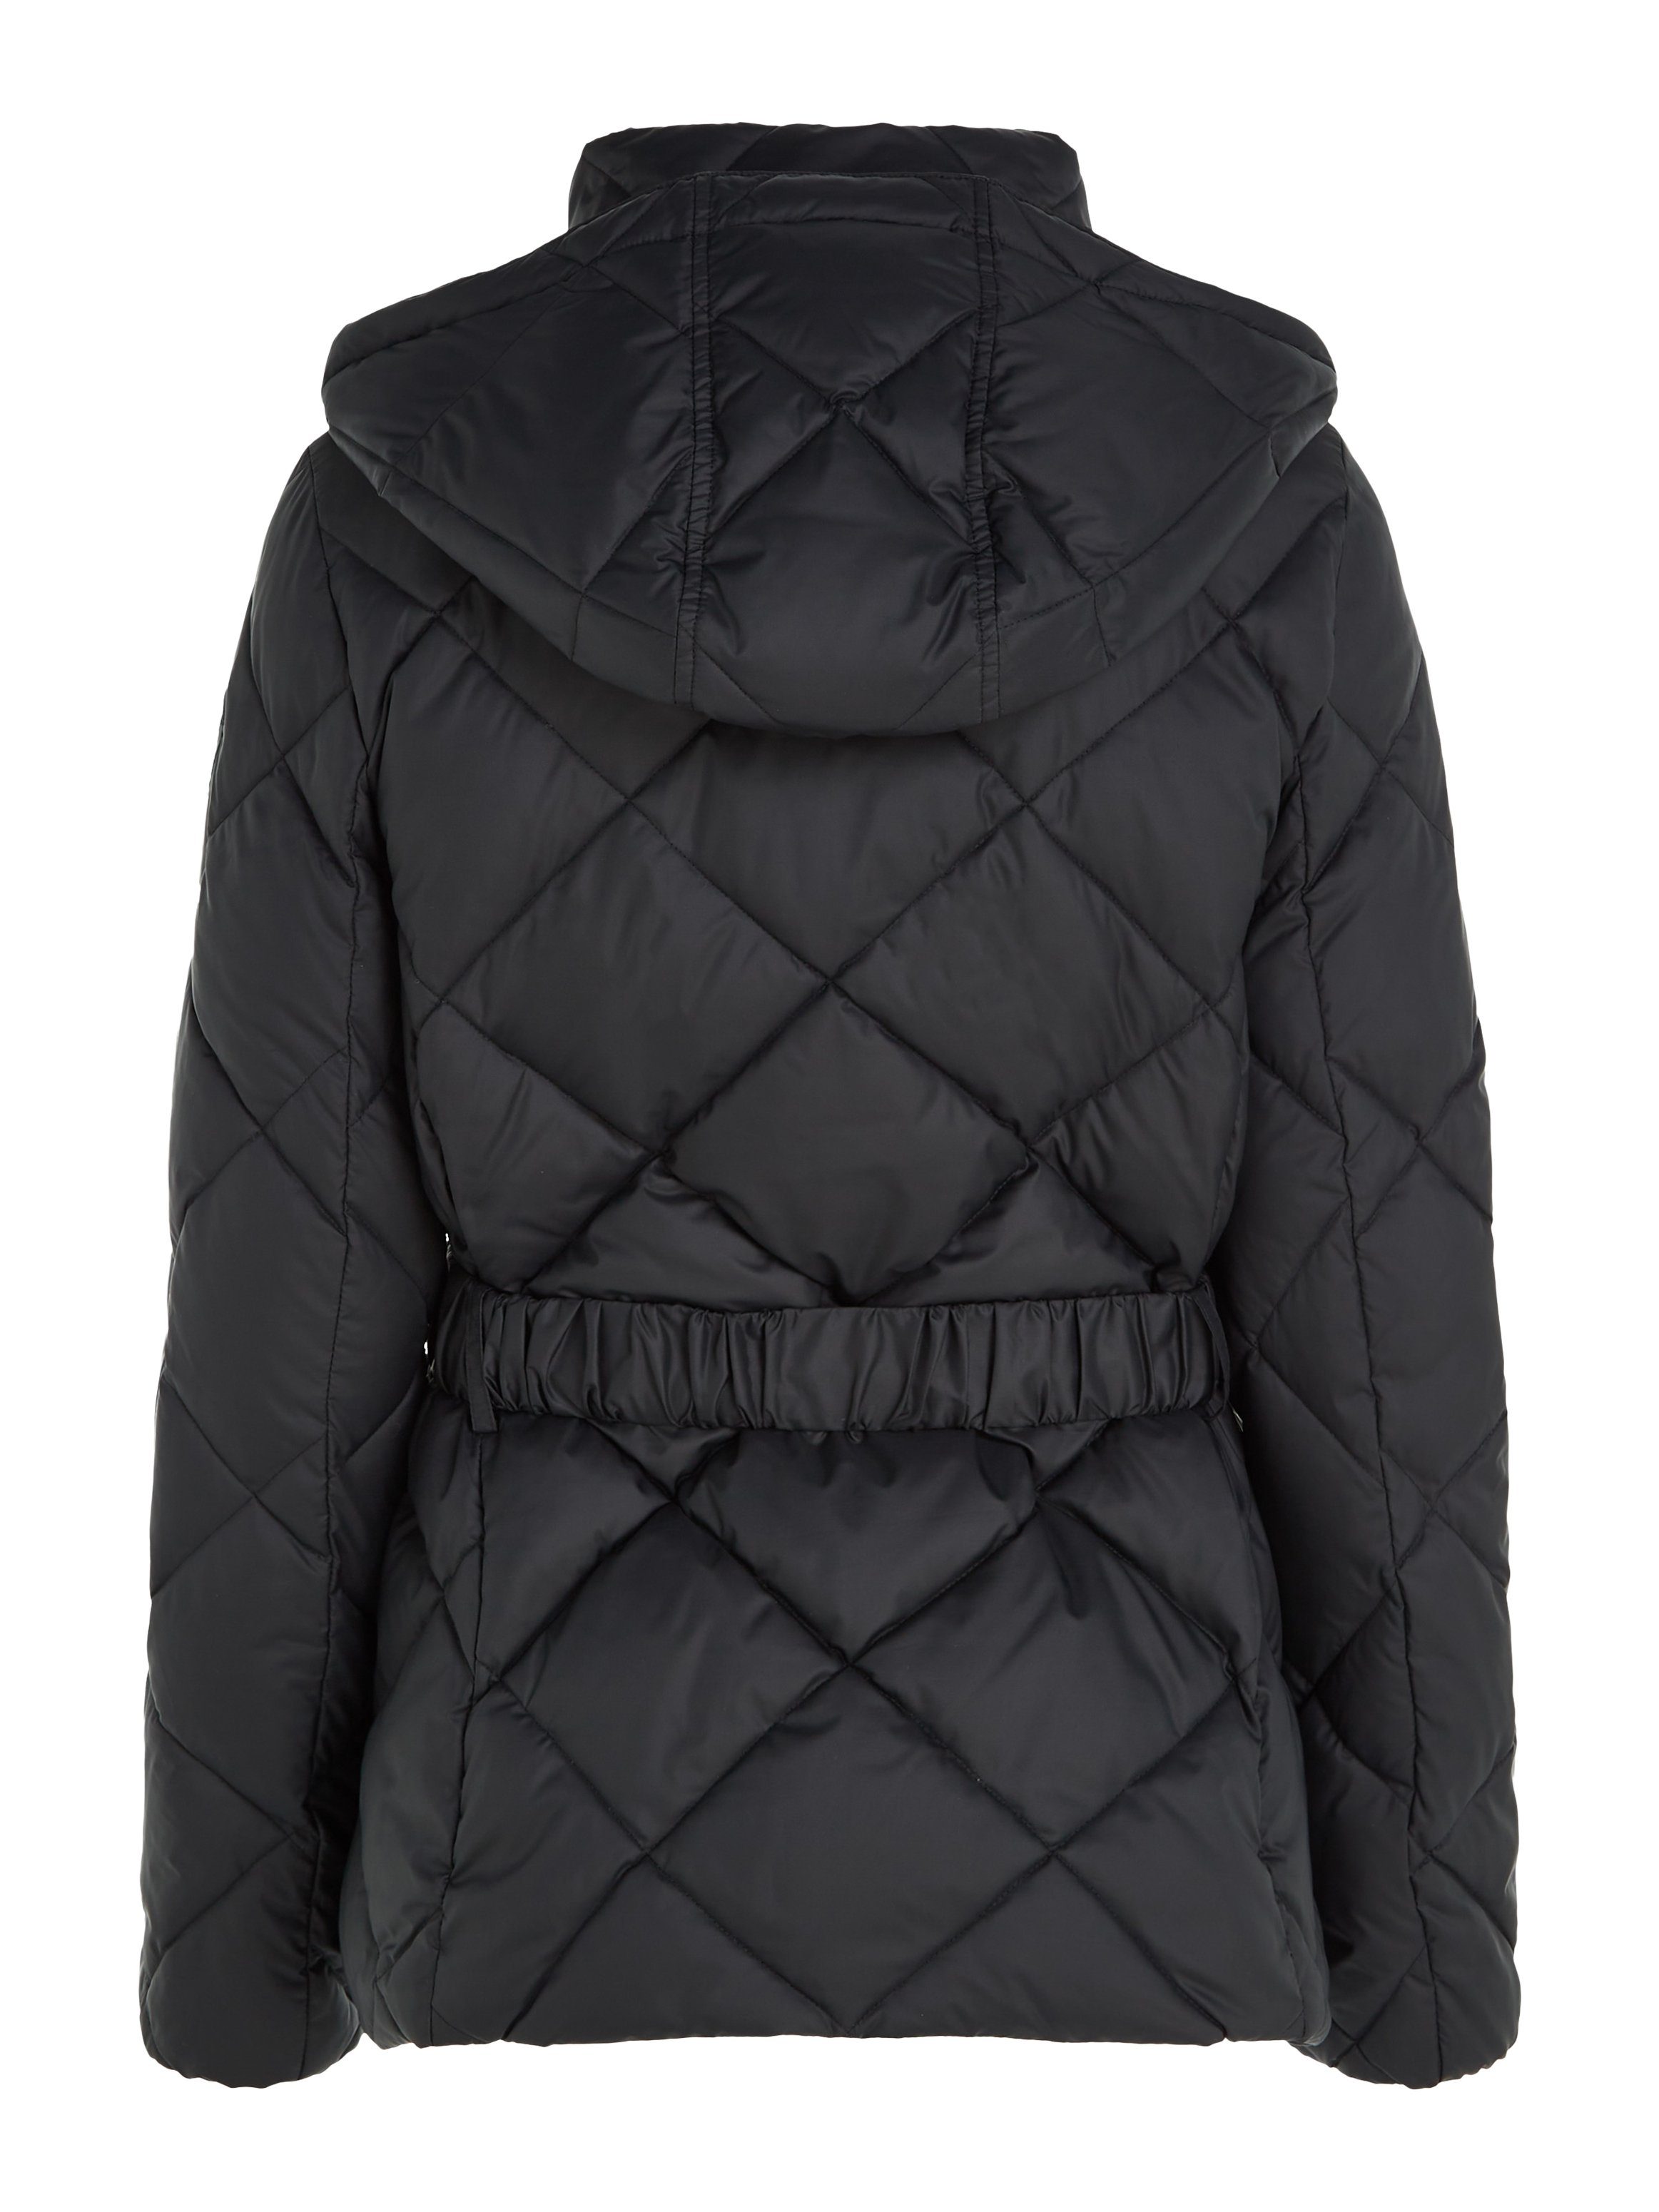 Logostickerei ELEVATED mit QUILTED JACKET Hilfiger Steppjacke BELTED Tommy